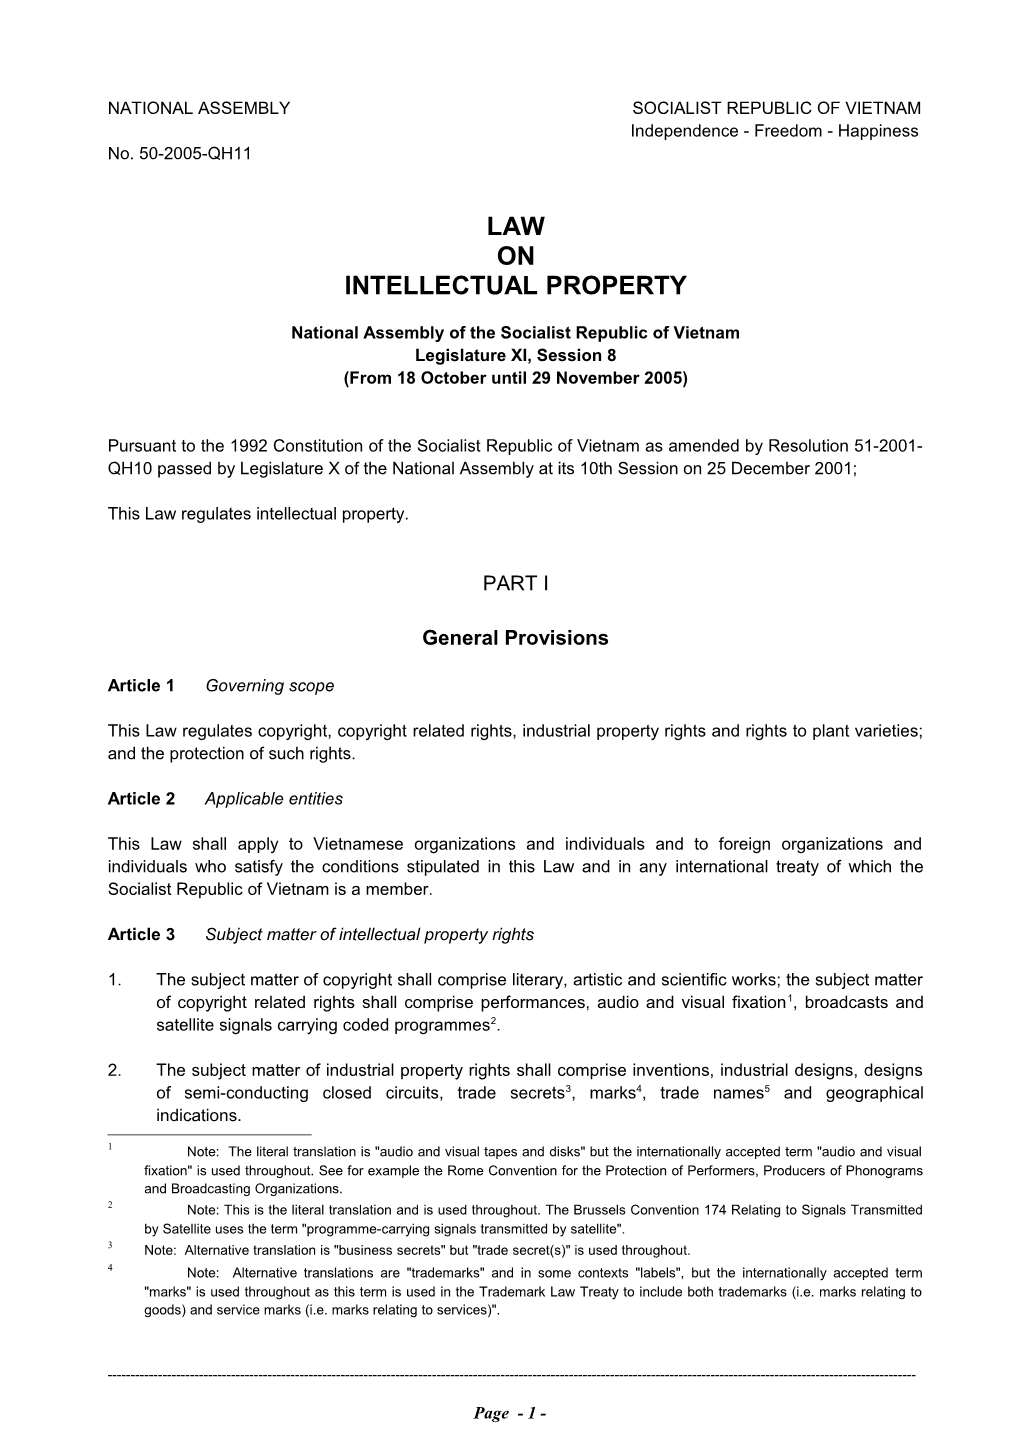 Law on Intellectual Property 2005